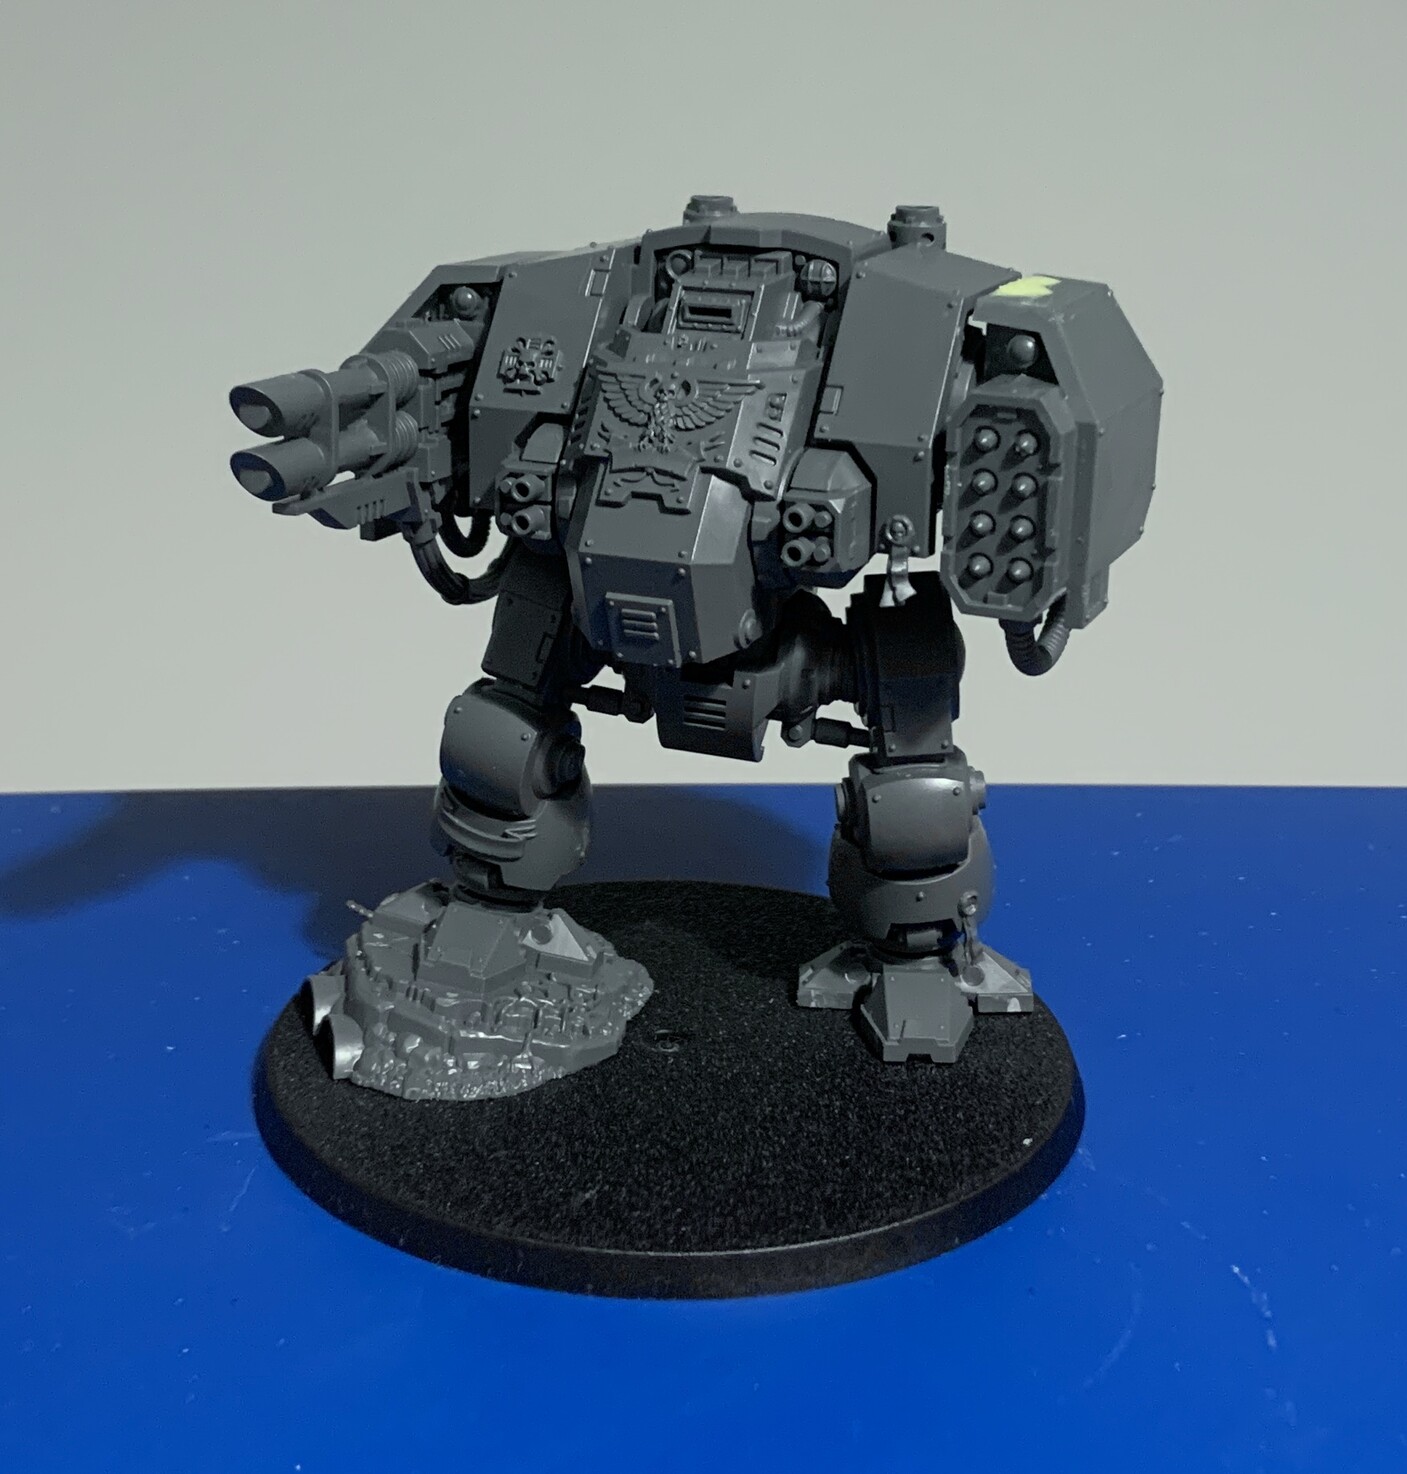 Ballistus dreadnought. The dreadnought is stood on its two legs with one foot on a raised rocky outcrop. The left hand weapon is a pair of long barrelled laser weapons and the right hand weapon is 8 missiles in a grid in a housing.